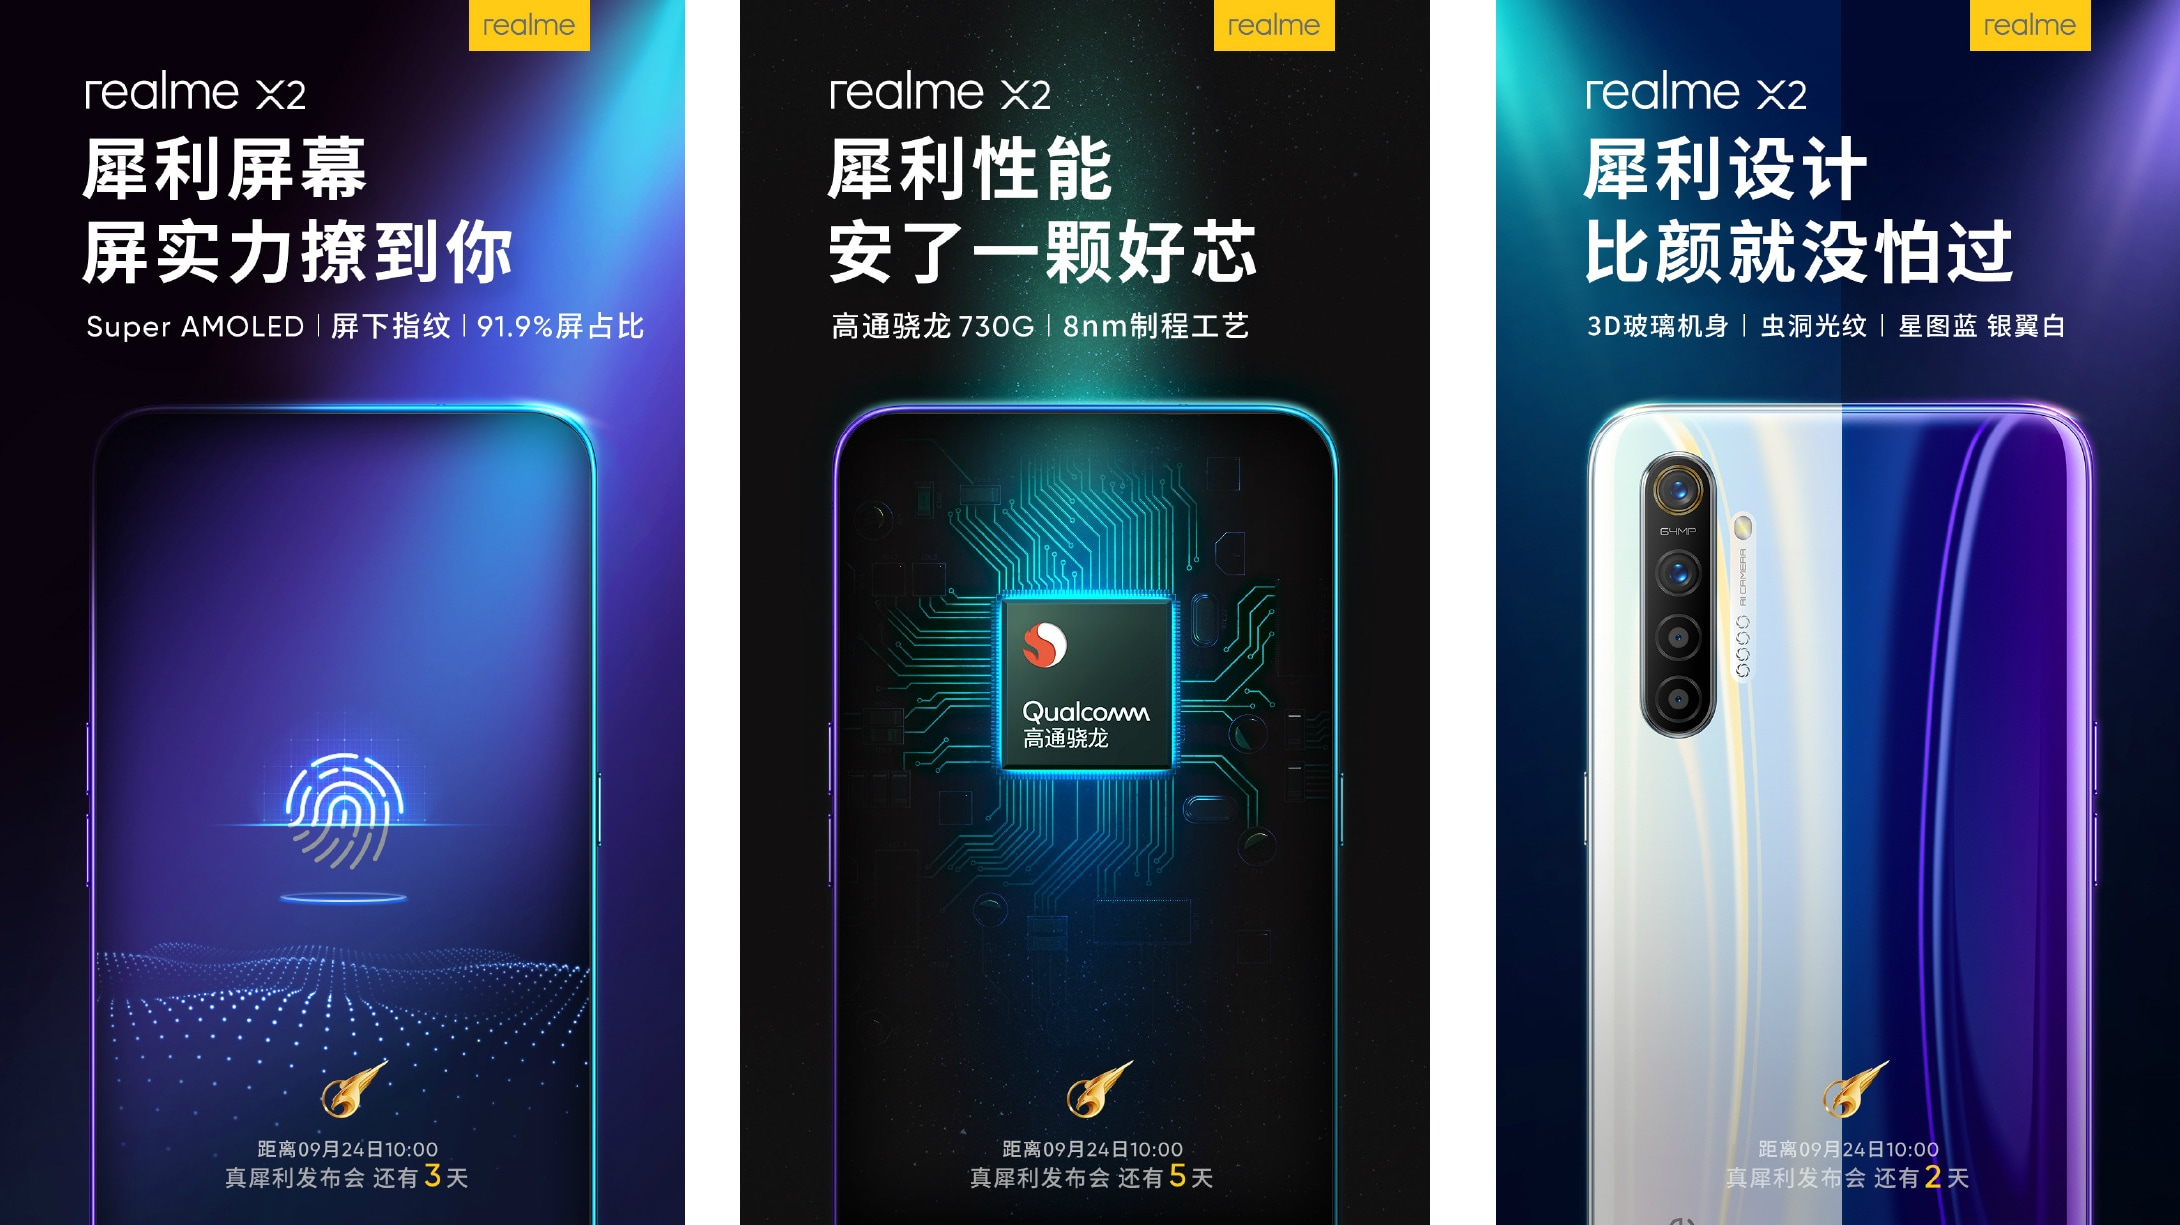 Realme X2 Specifications Teased Ahead of Official Launch